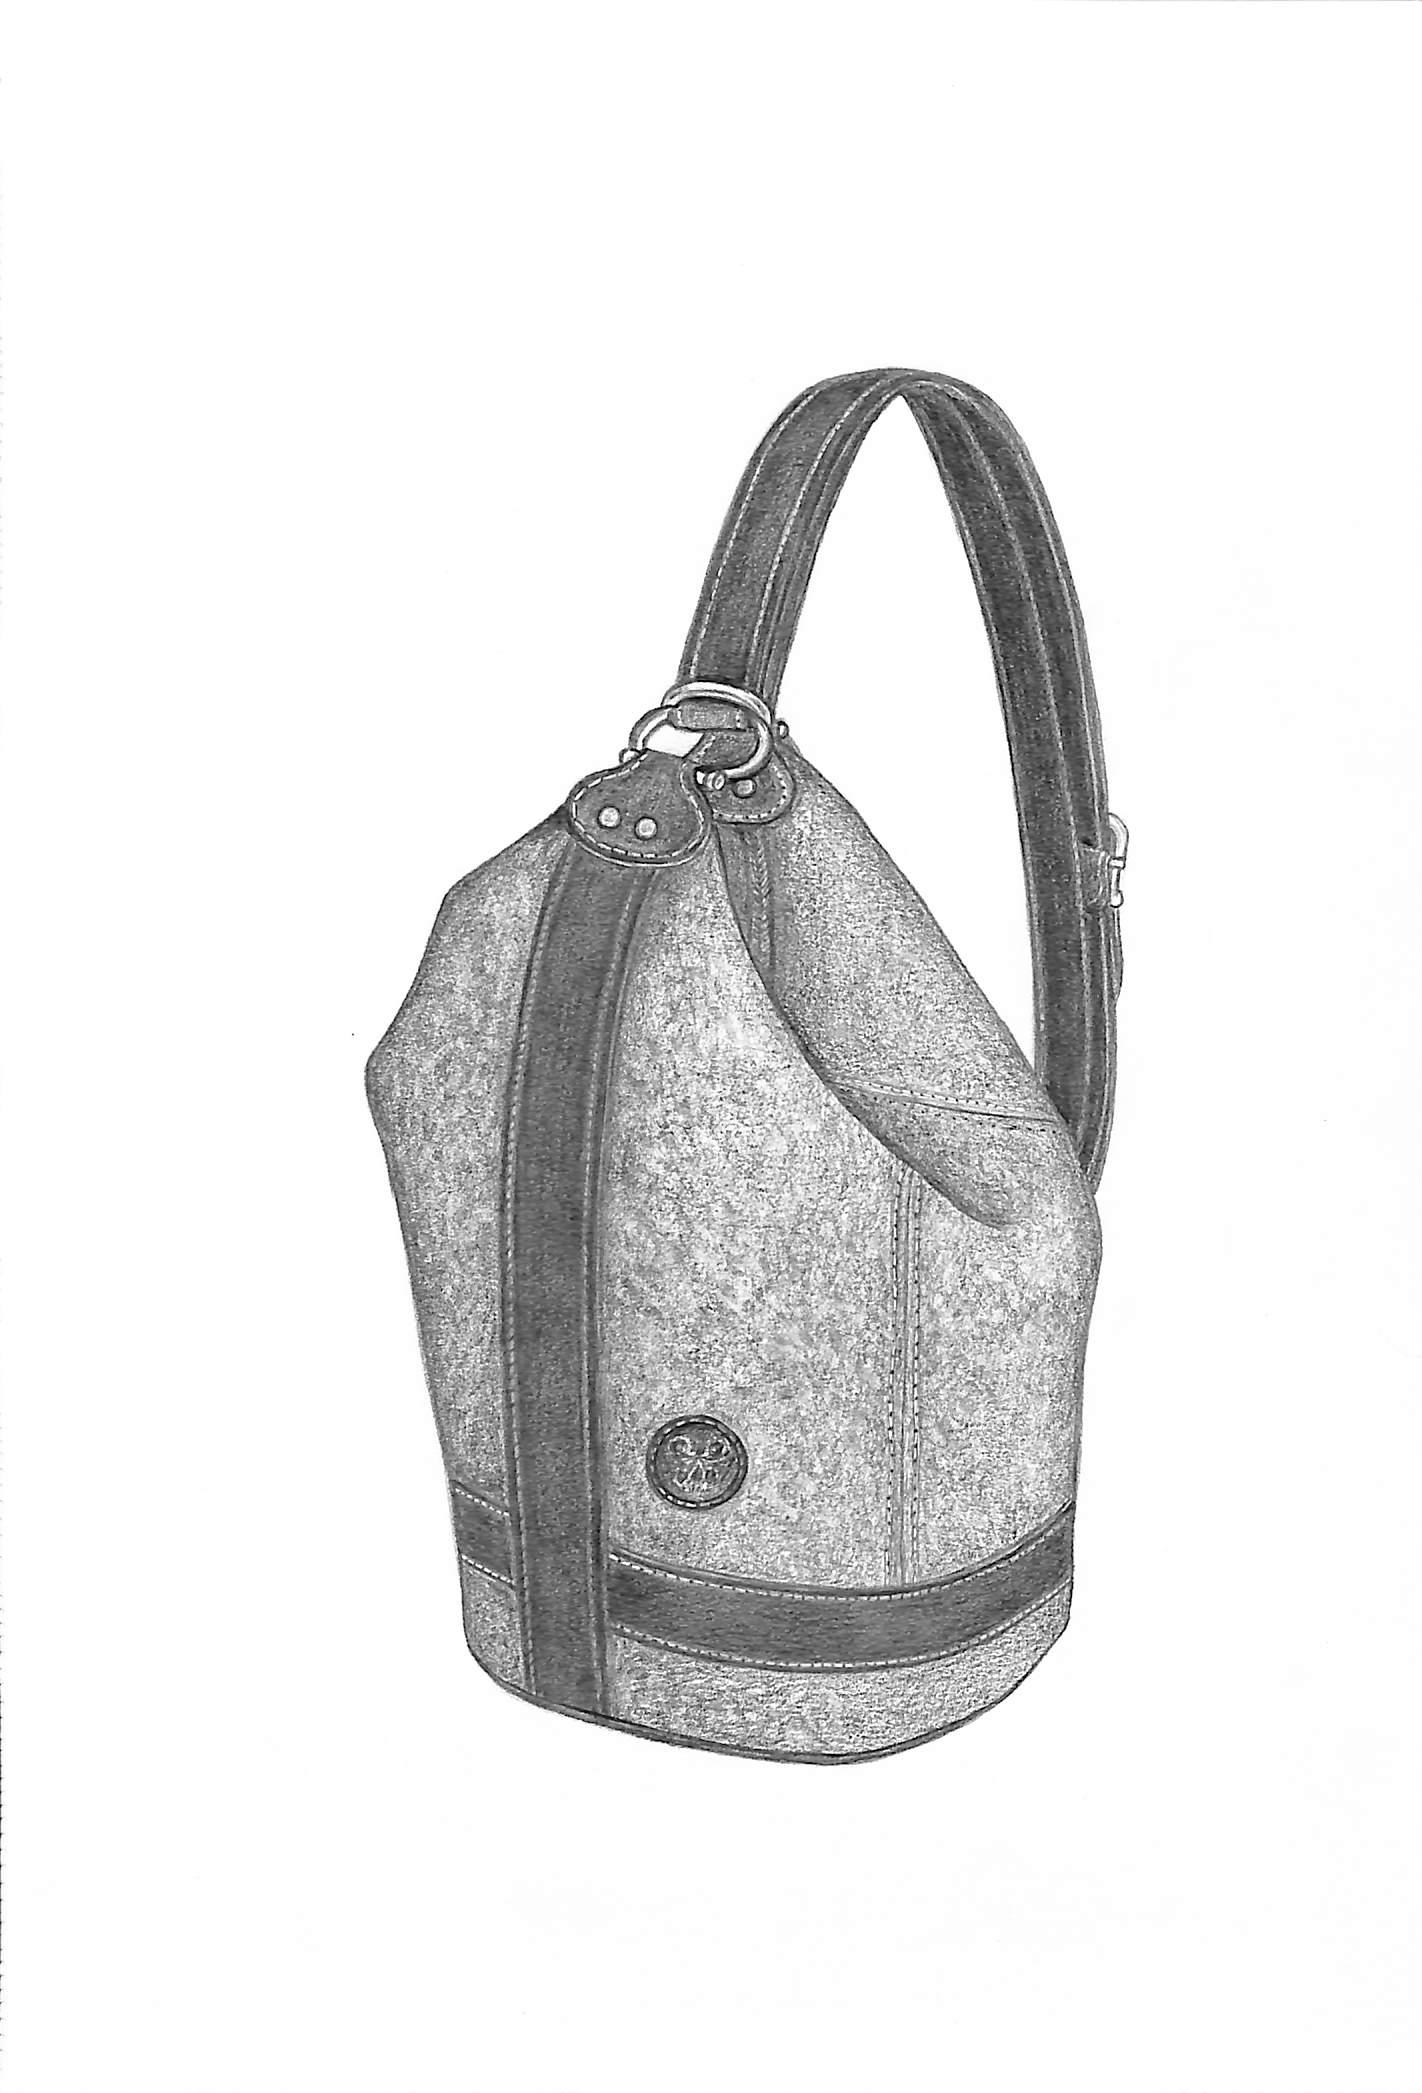 Capybara Shoulder Tote Graphite Drawing - Art by Unknown